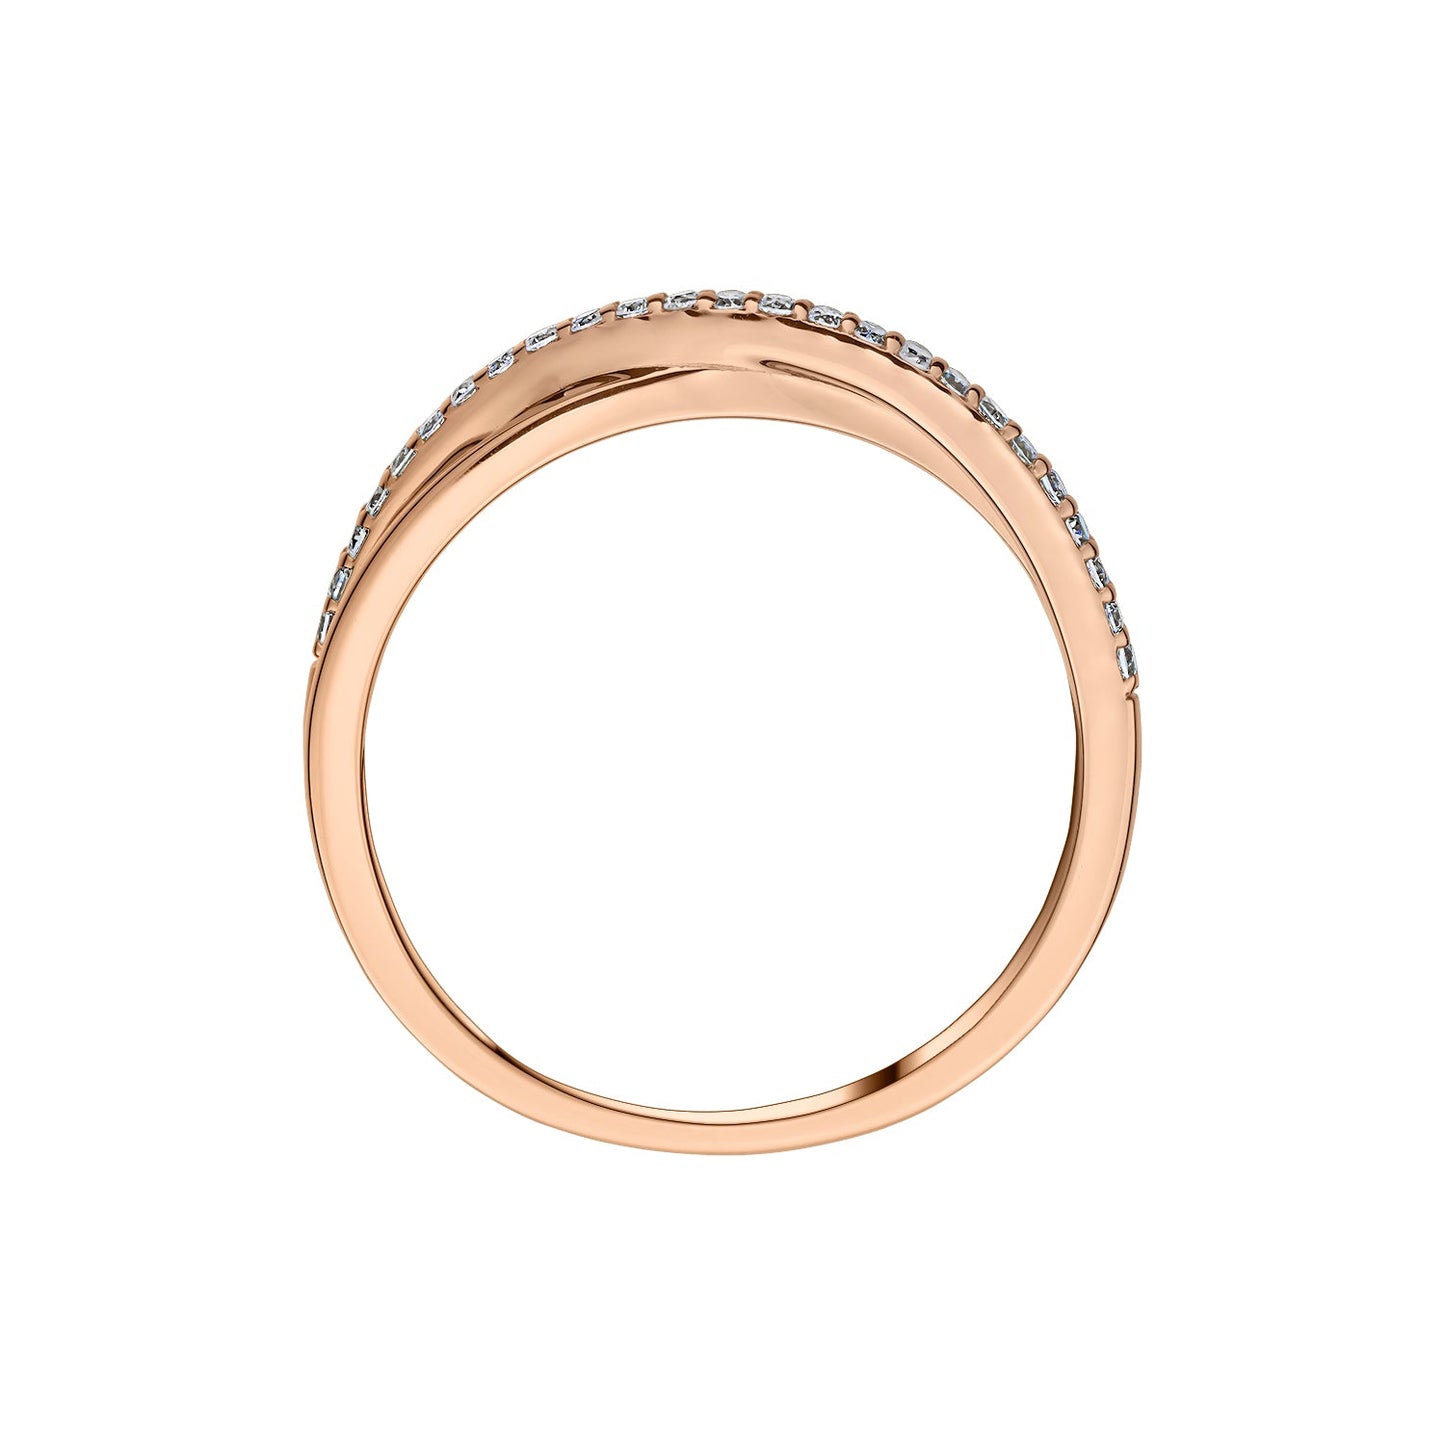 Gold Ring 14K (585) Tordue with Diamonds 0.13 ct - Pink